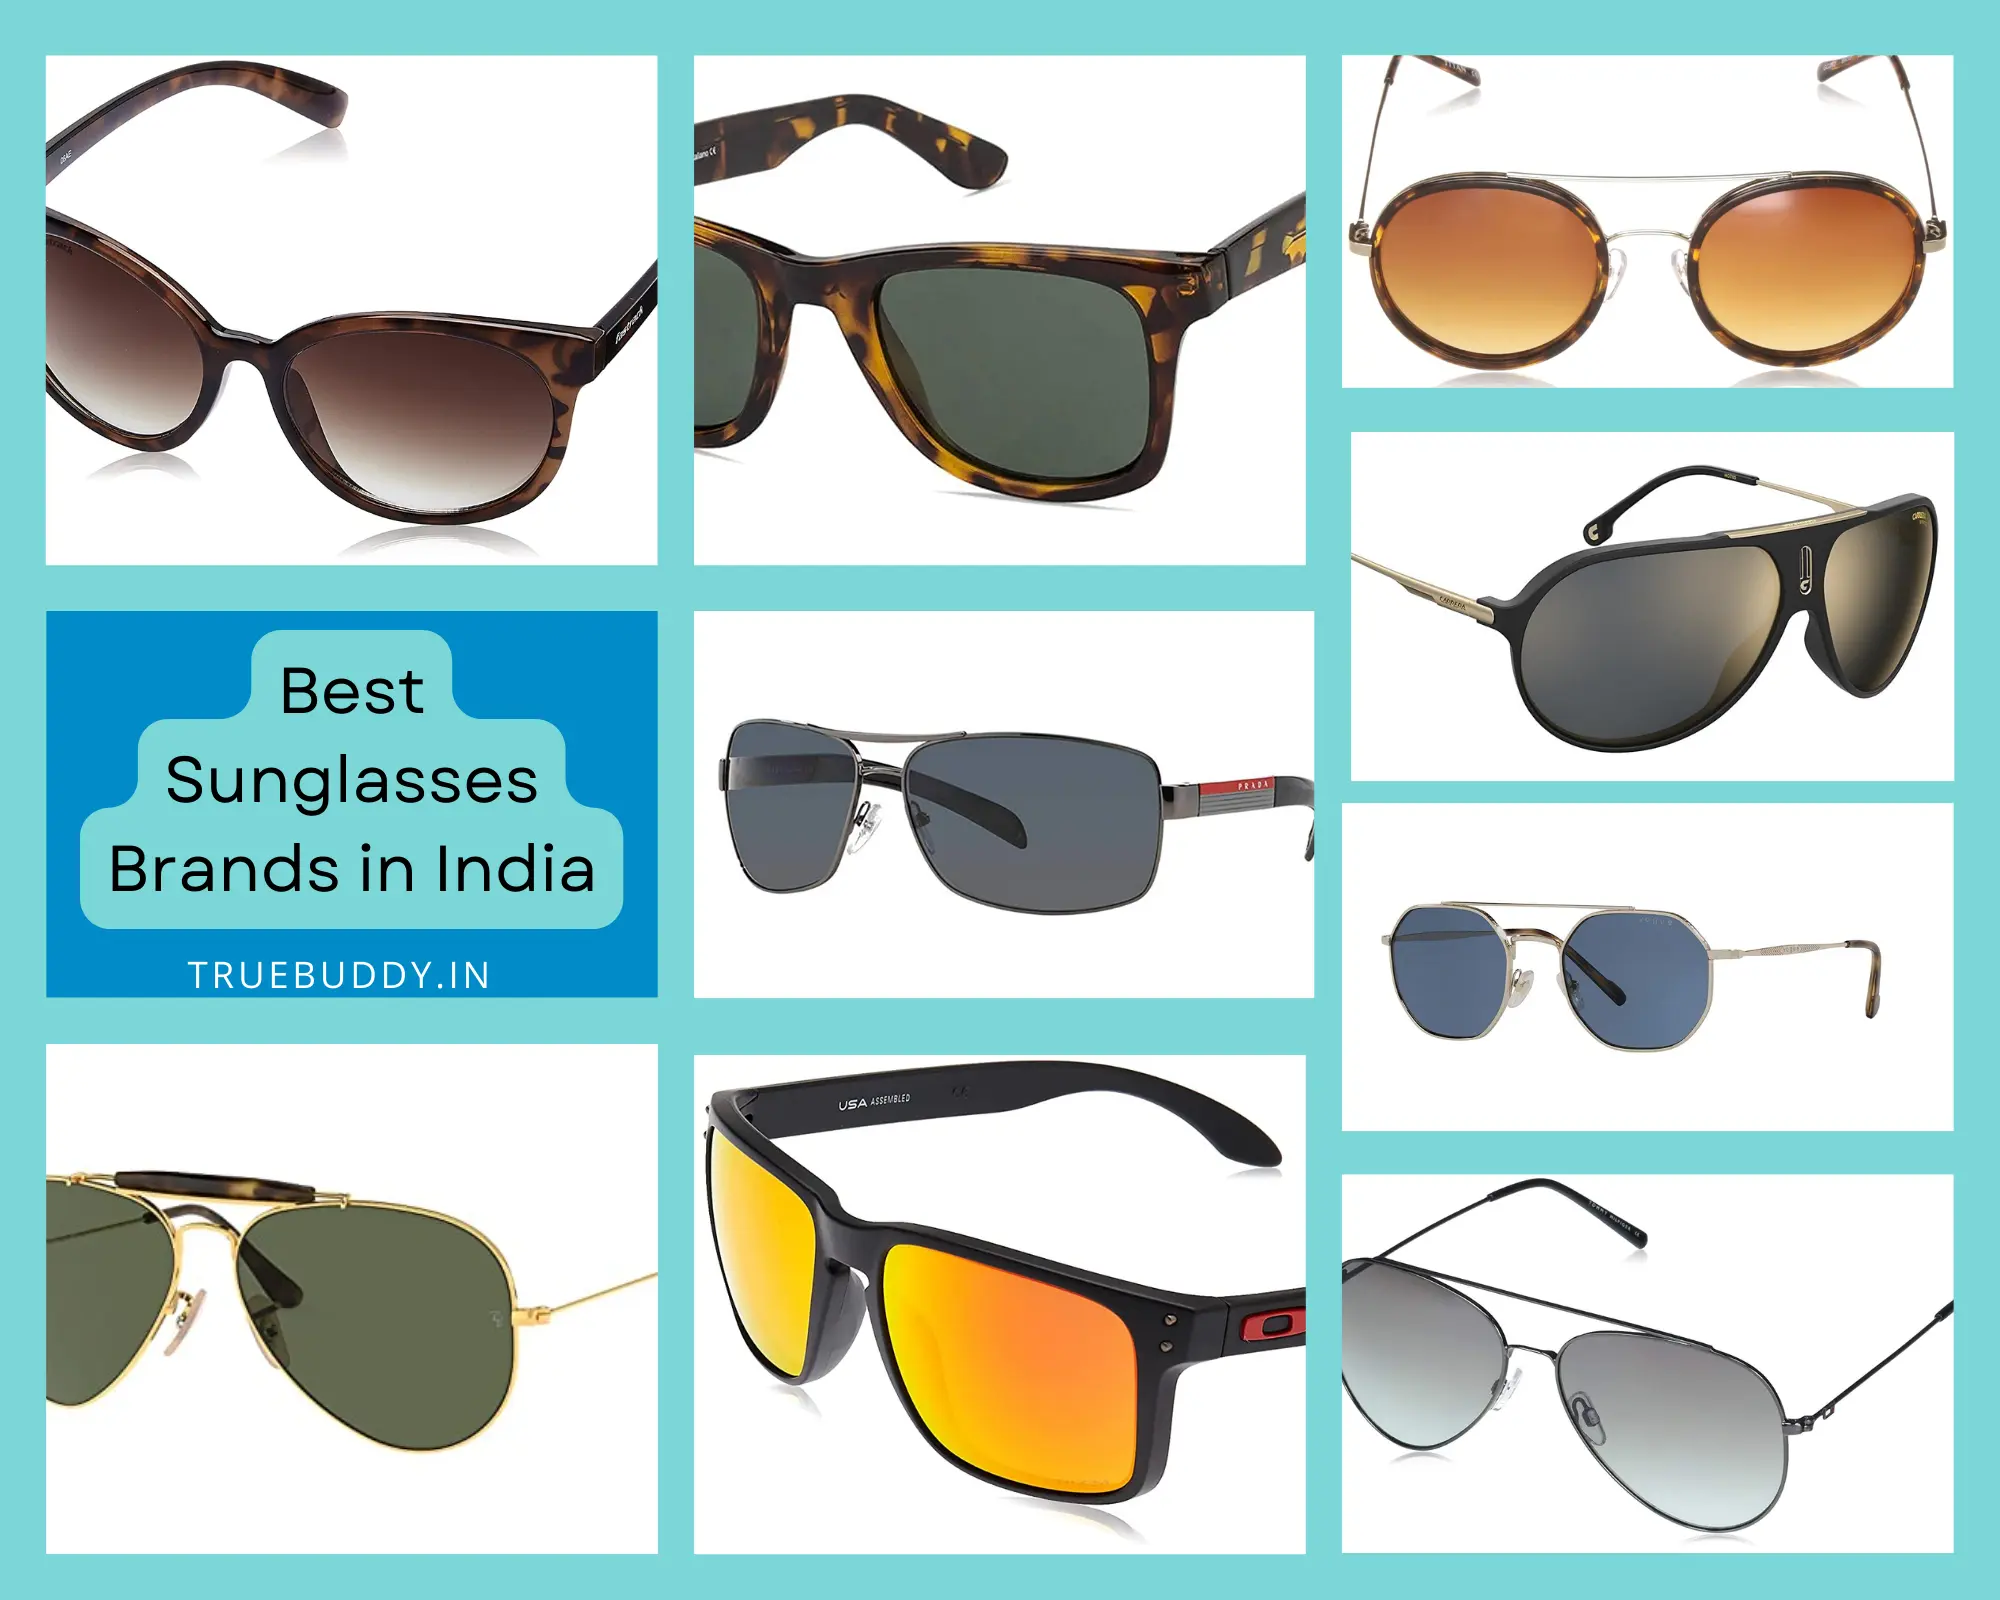 Top Rated Sunglasses Brands in India